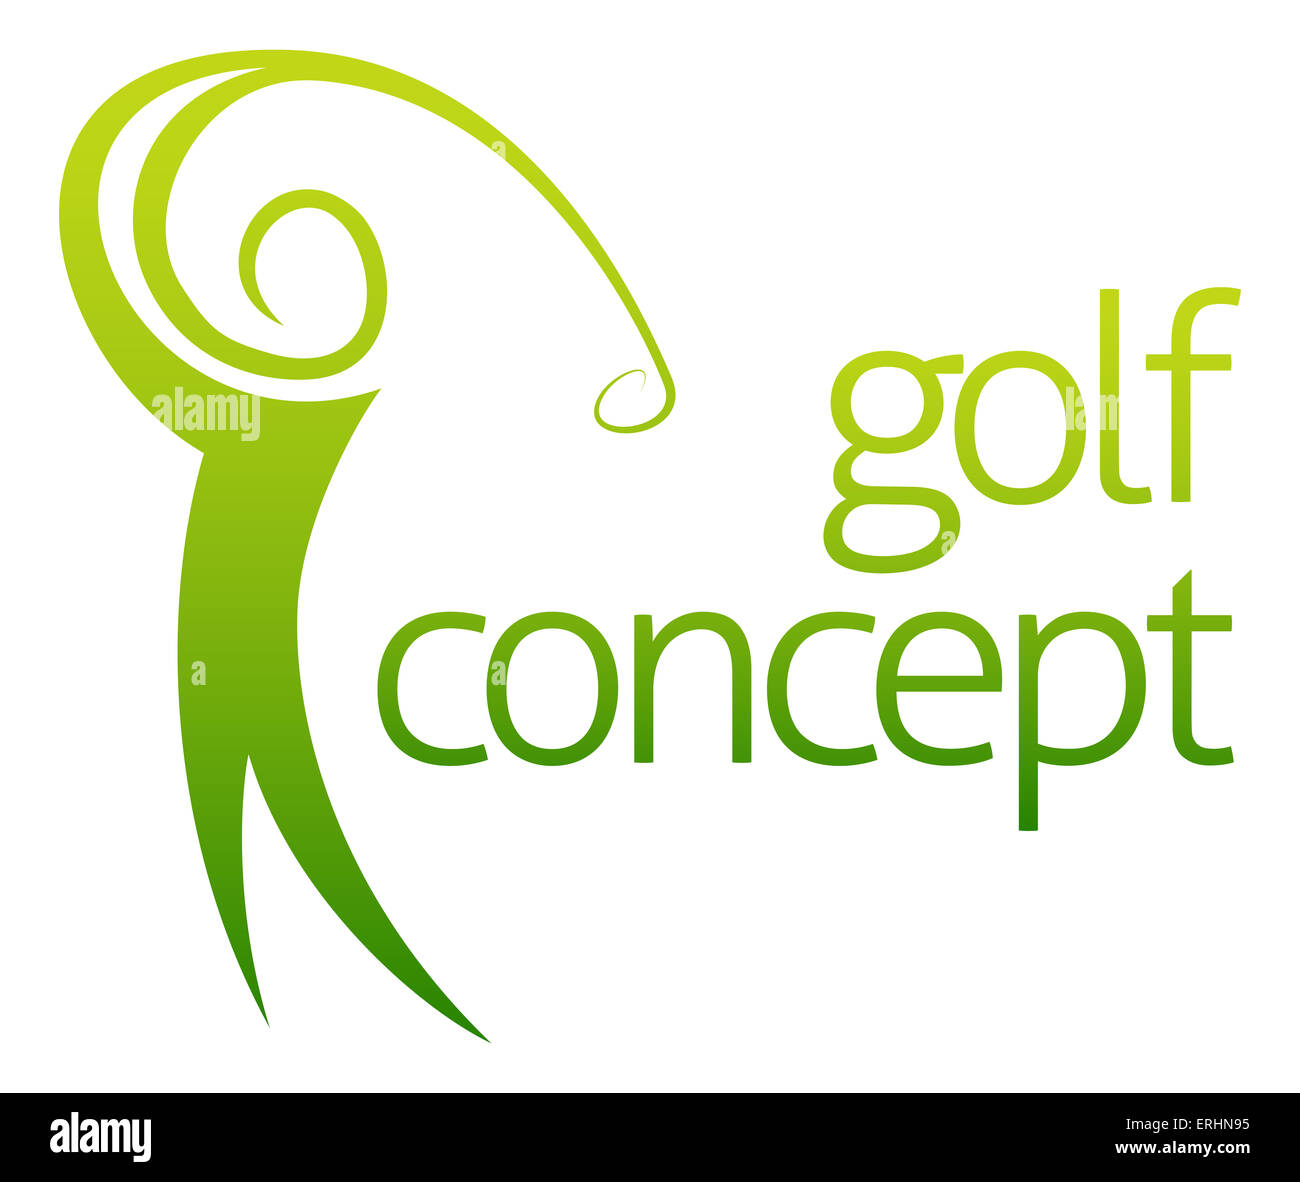 Golf swing abstract concept of a golfer figure playing golf Stock Photo